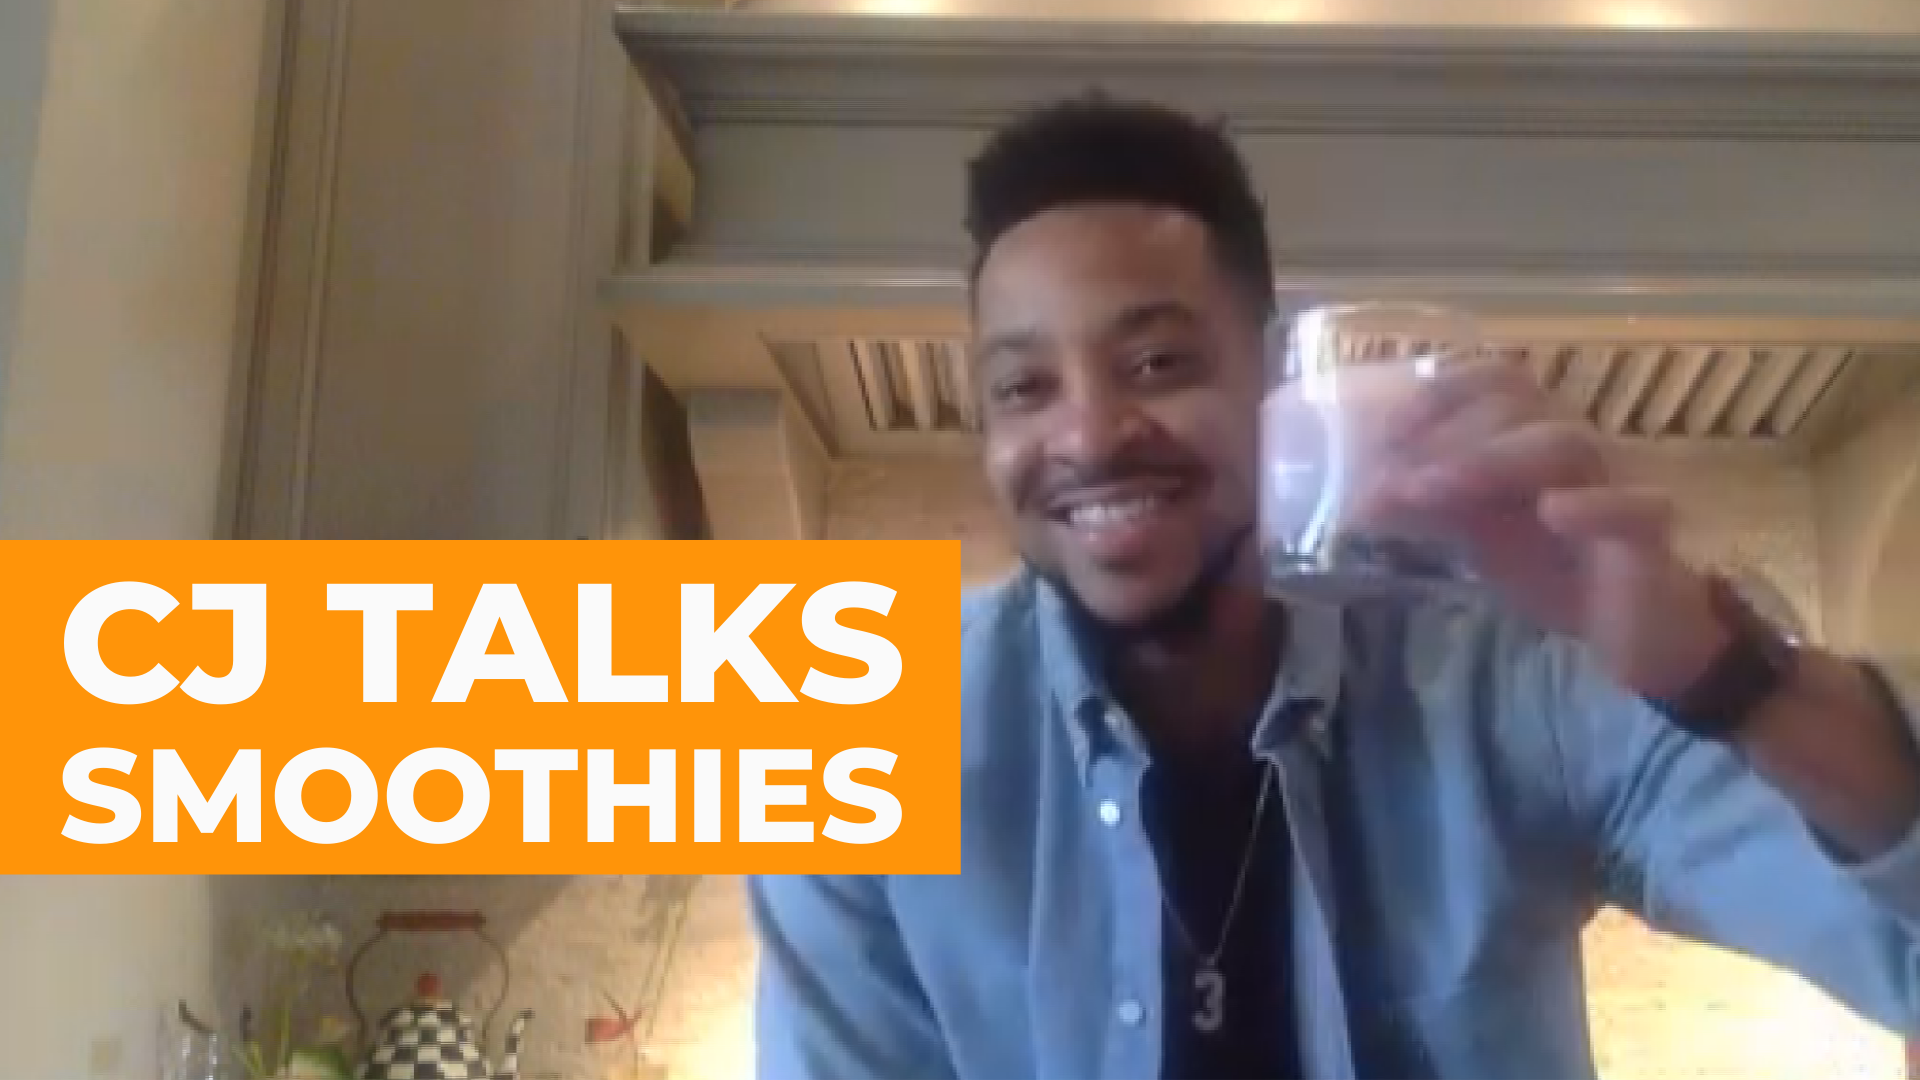 We had a chance to catch up with CJ McCollum this past week on Zoom and what he really wanted to talk about was the time he spent making smoothies. Yes, smoothies!